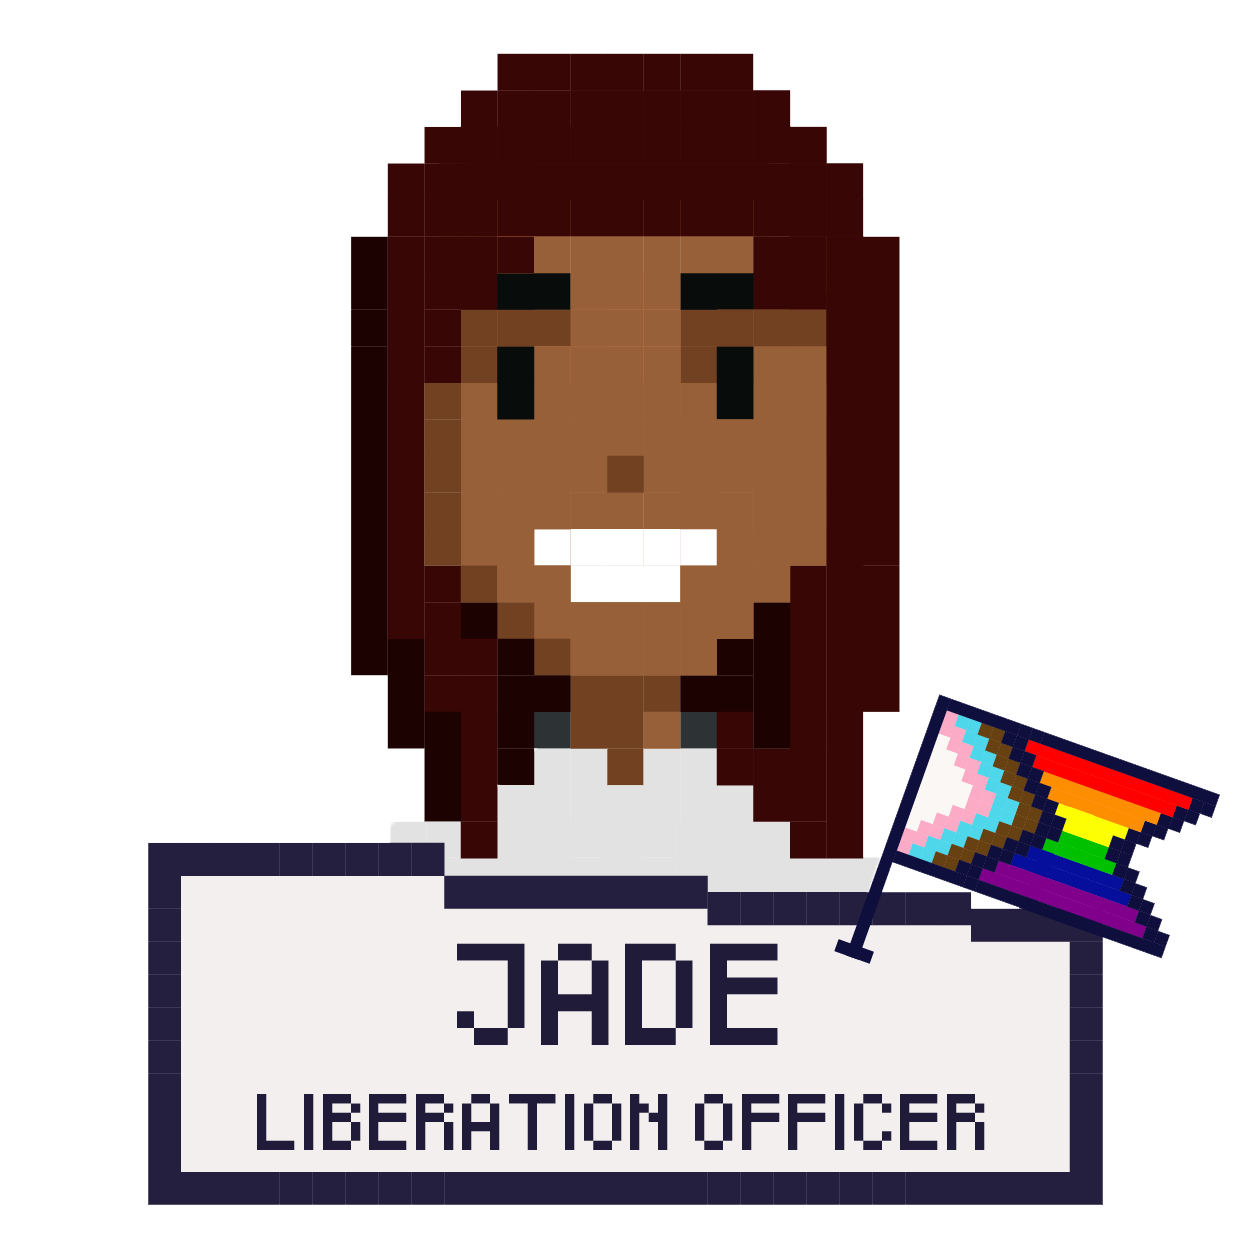 Jade Thomas, liberation officer she/her - click to view her full profile